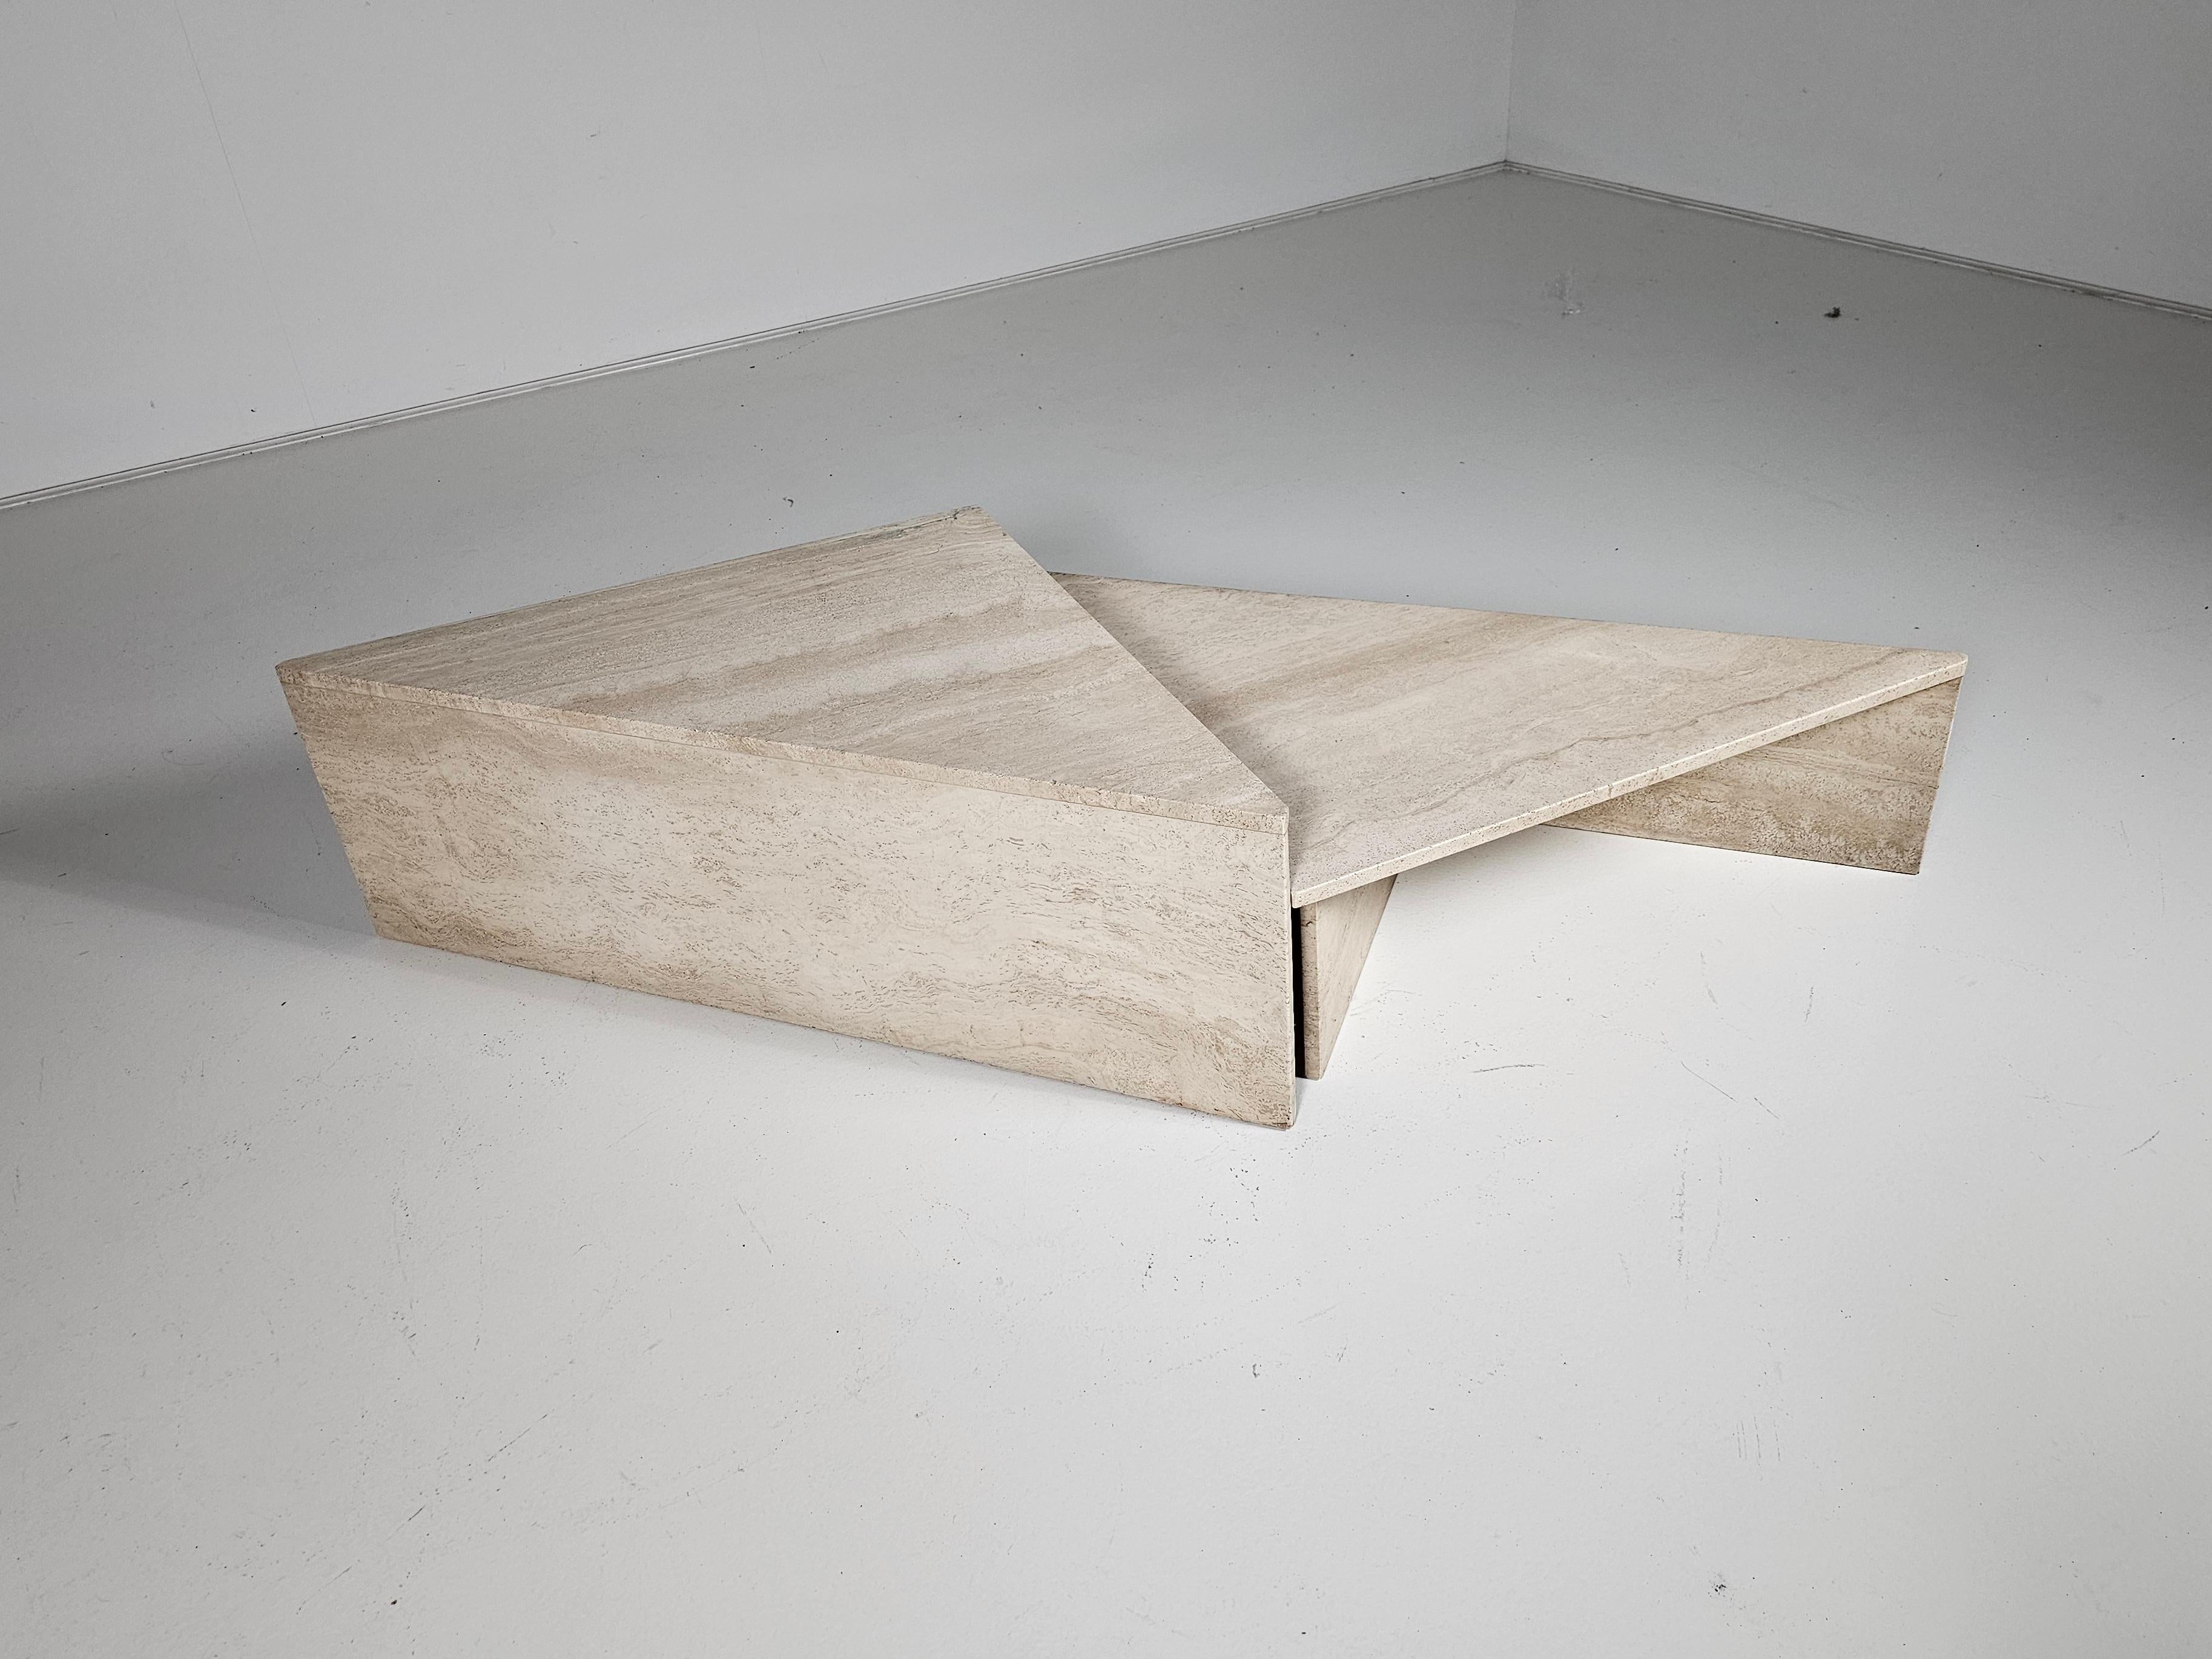 European Two Part Travertine Modular Coffee Table by Up & Up, circa 1970s For Sale